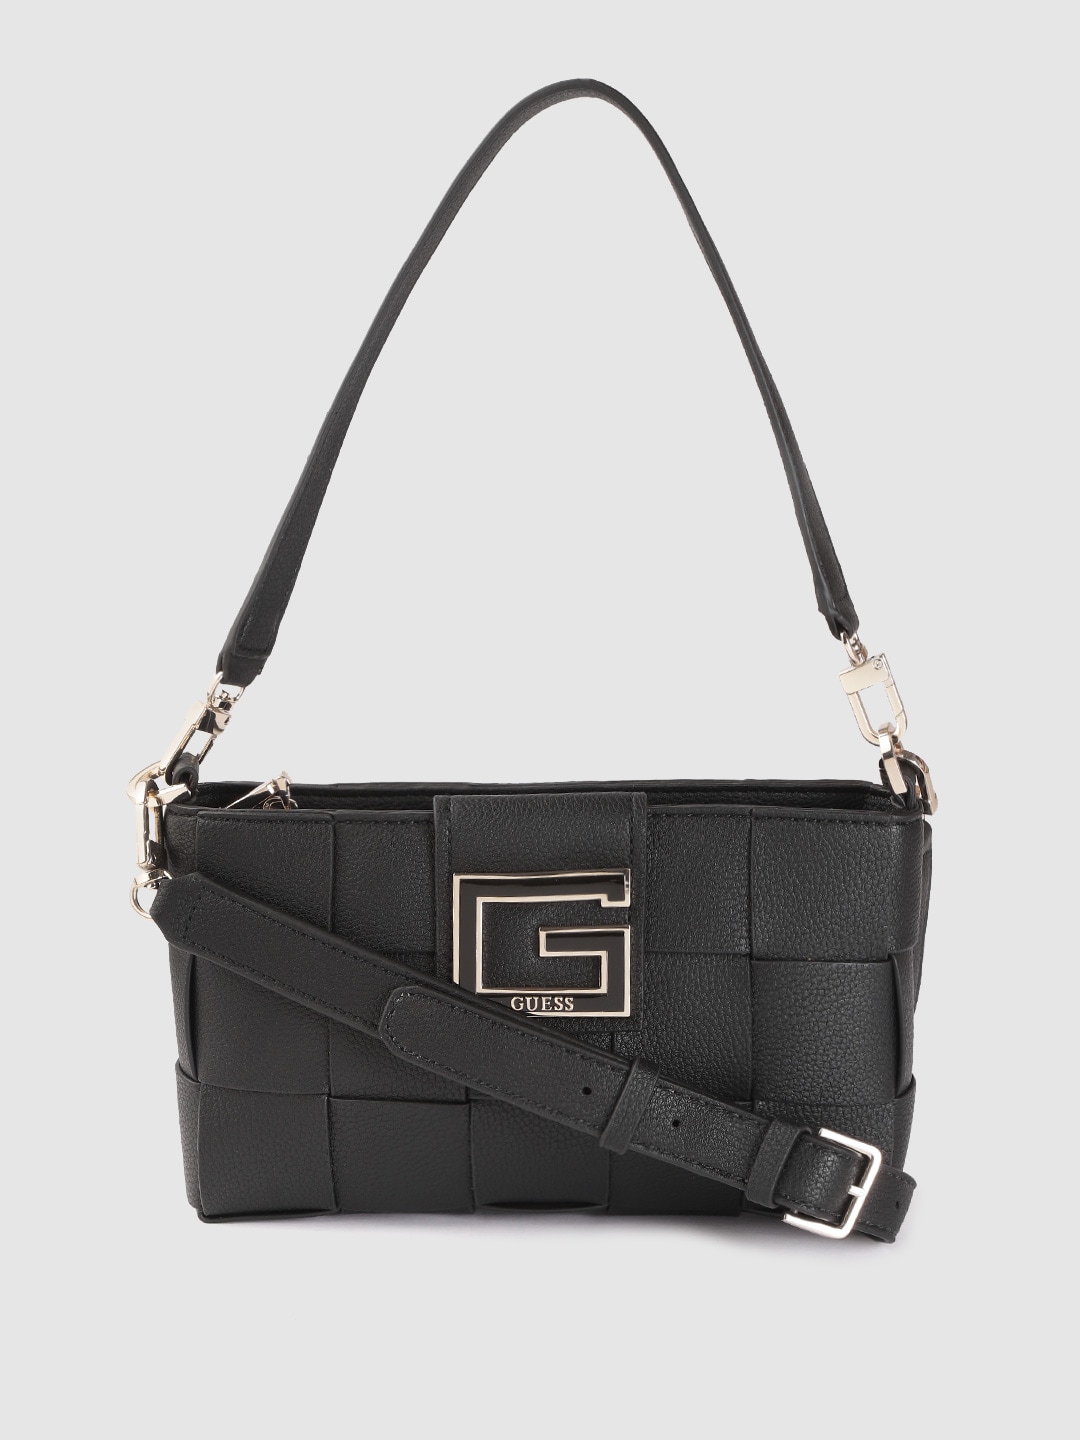 GUESS Black Basketweave Textured Structured Sling Bag Price in India